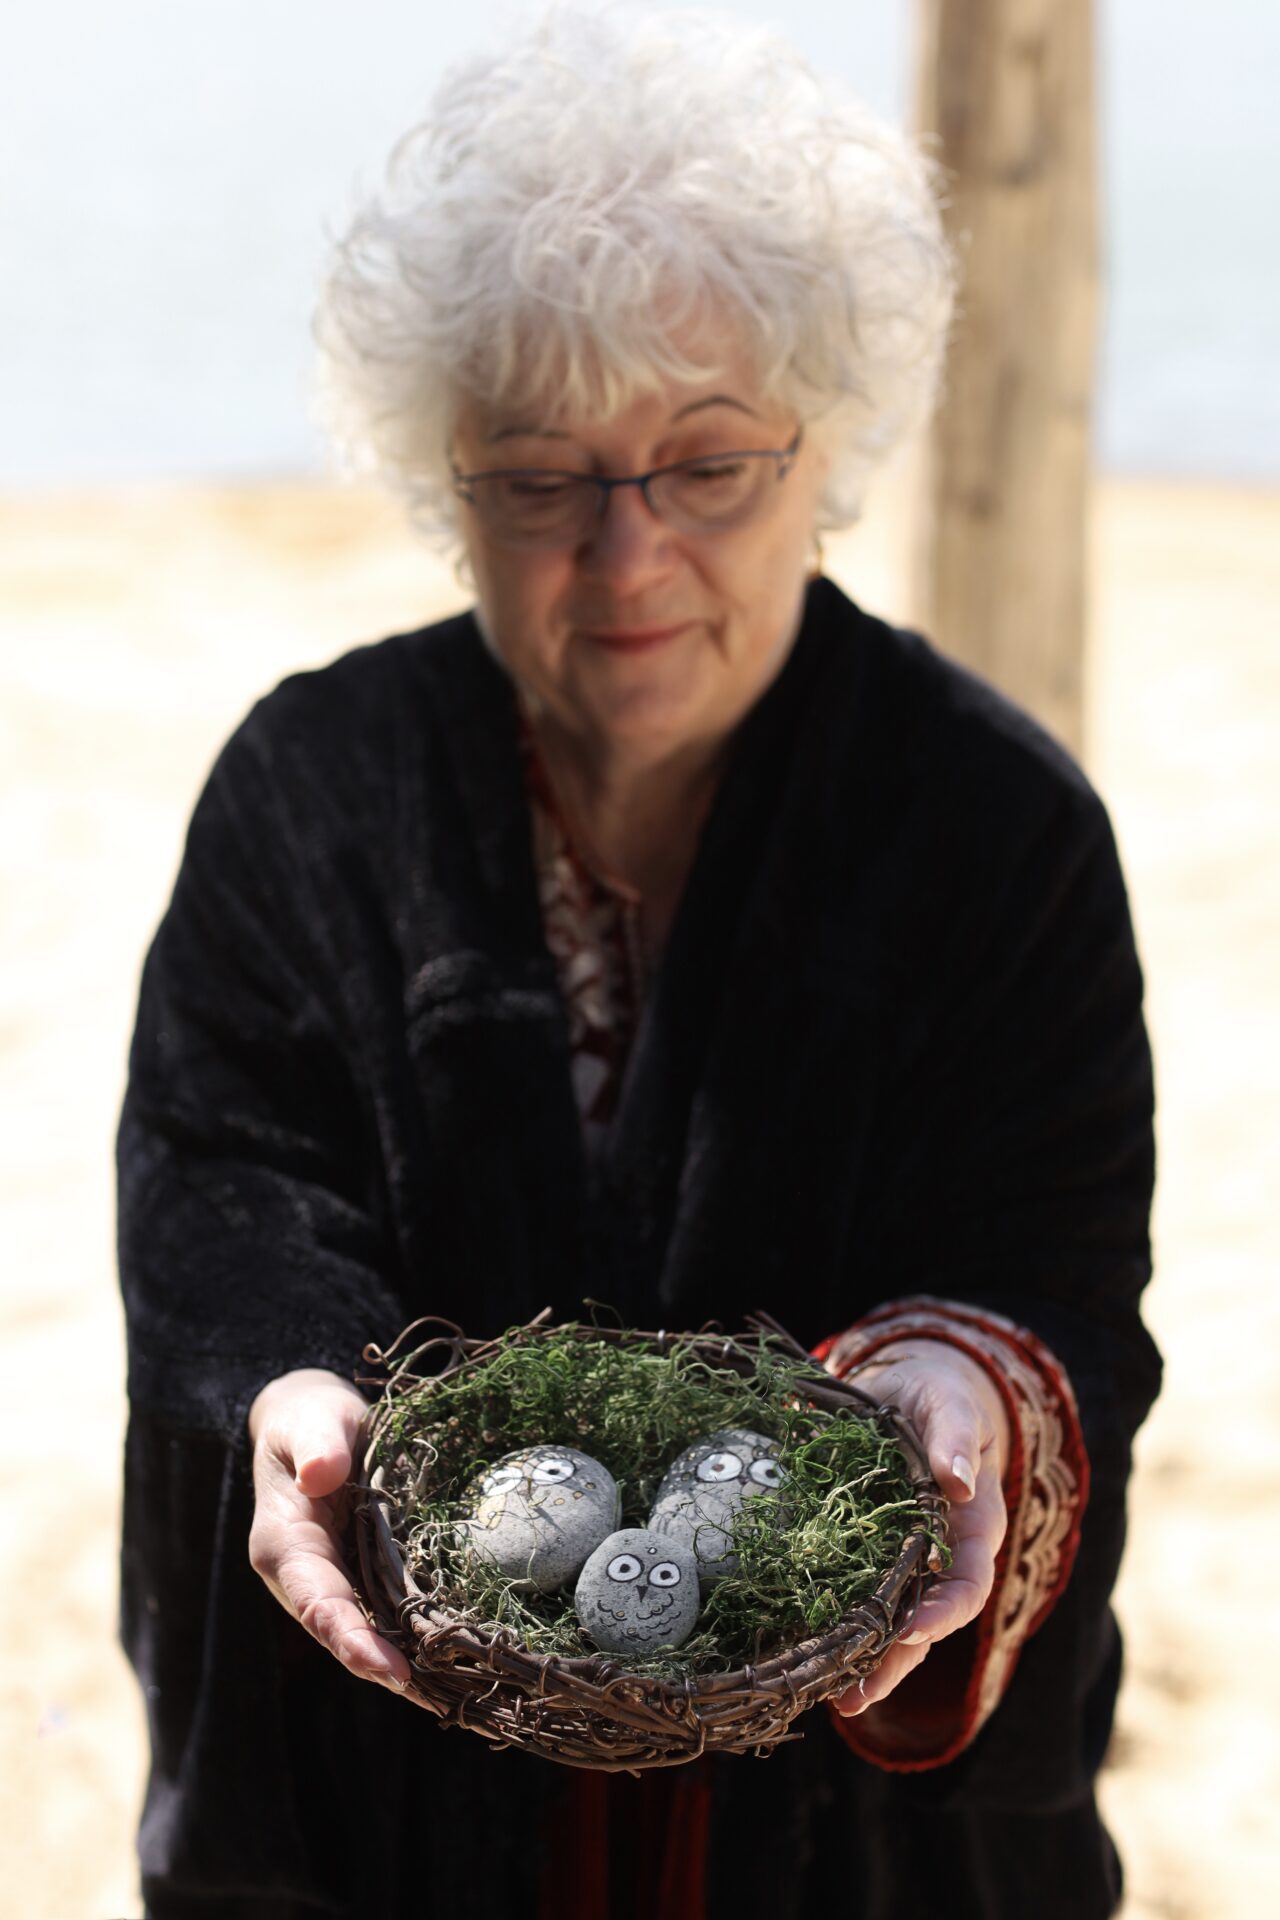 Connecticut celebrant Zita Christian with baby blessing ritual nest and owl stones